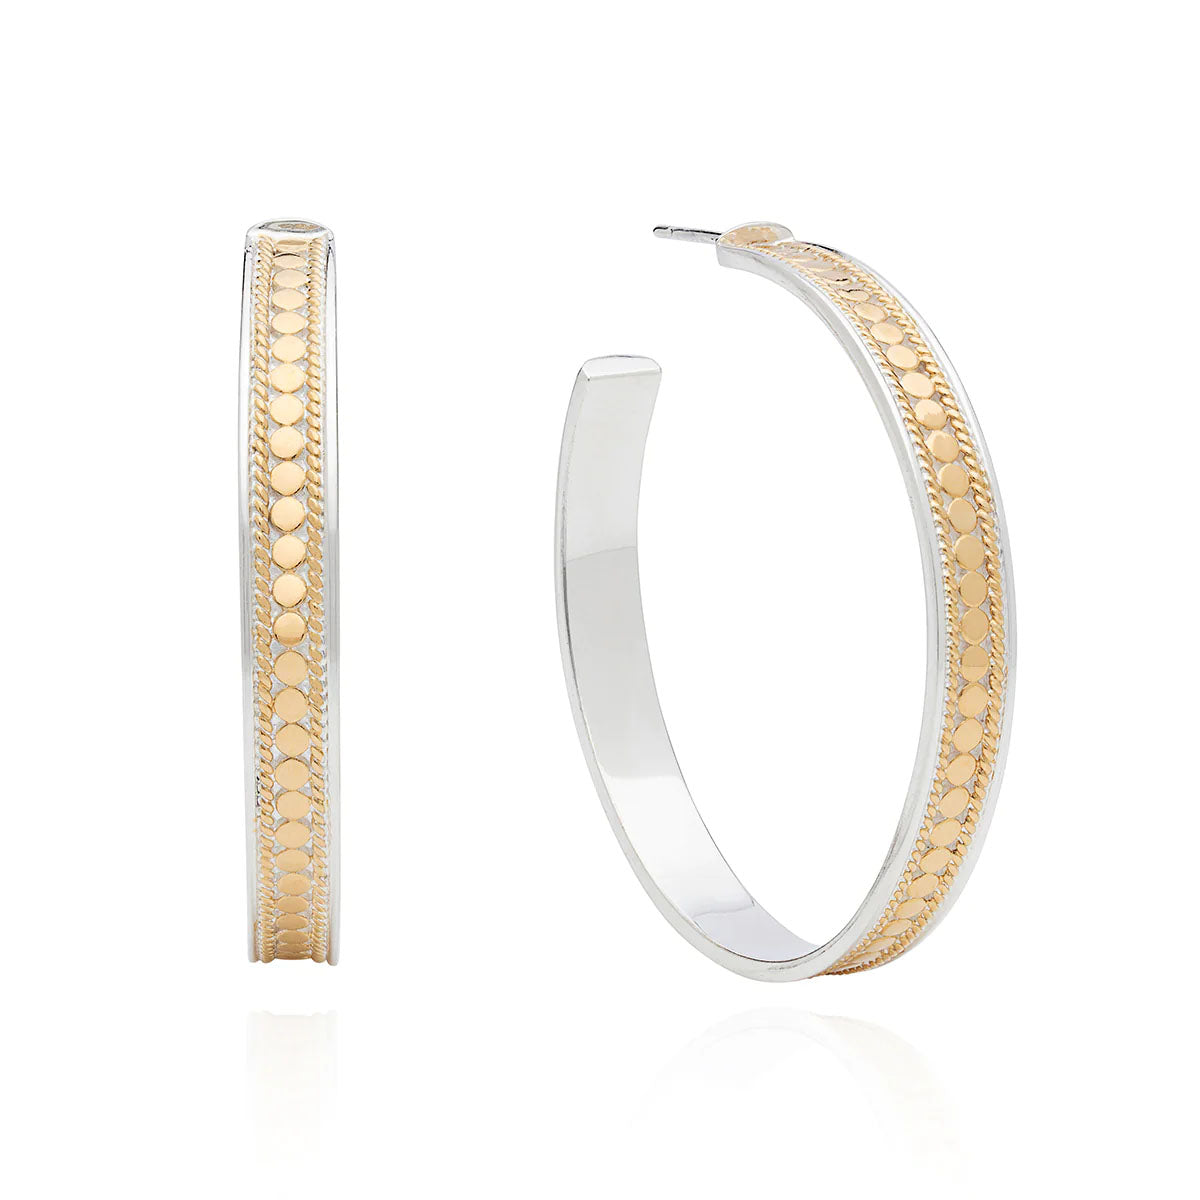 Anna Beck Classic Large Hoop Earrings - Gold 